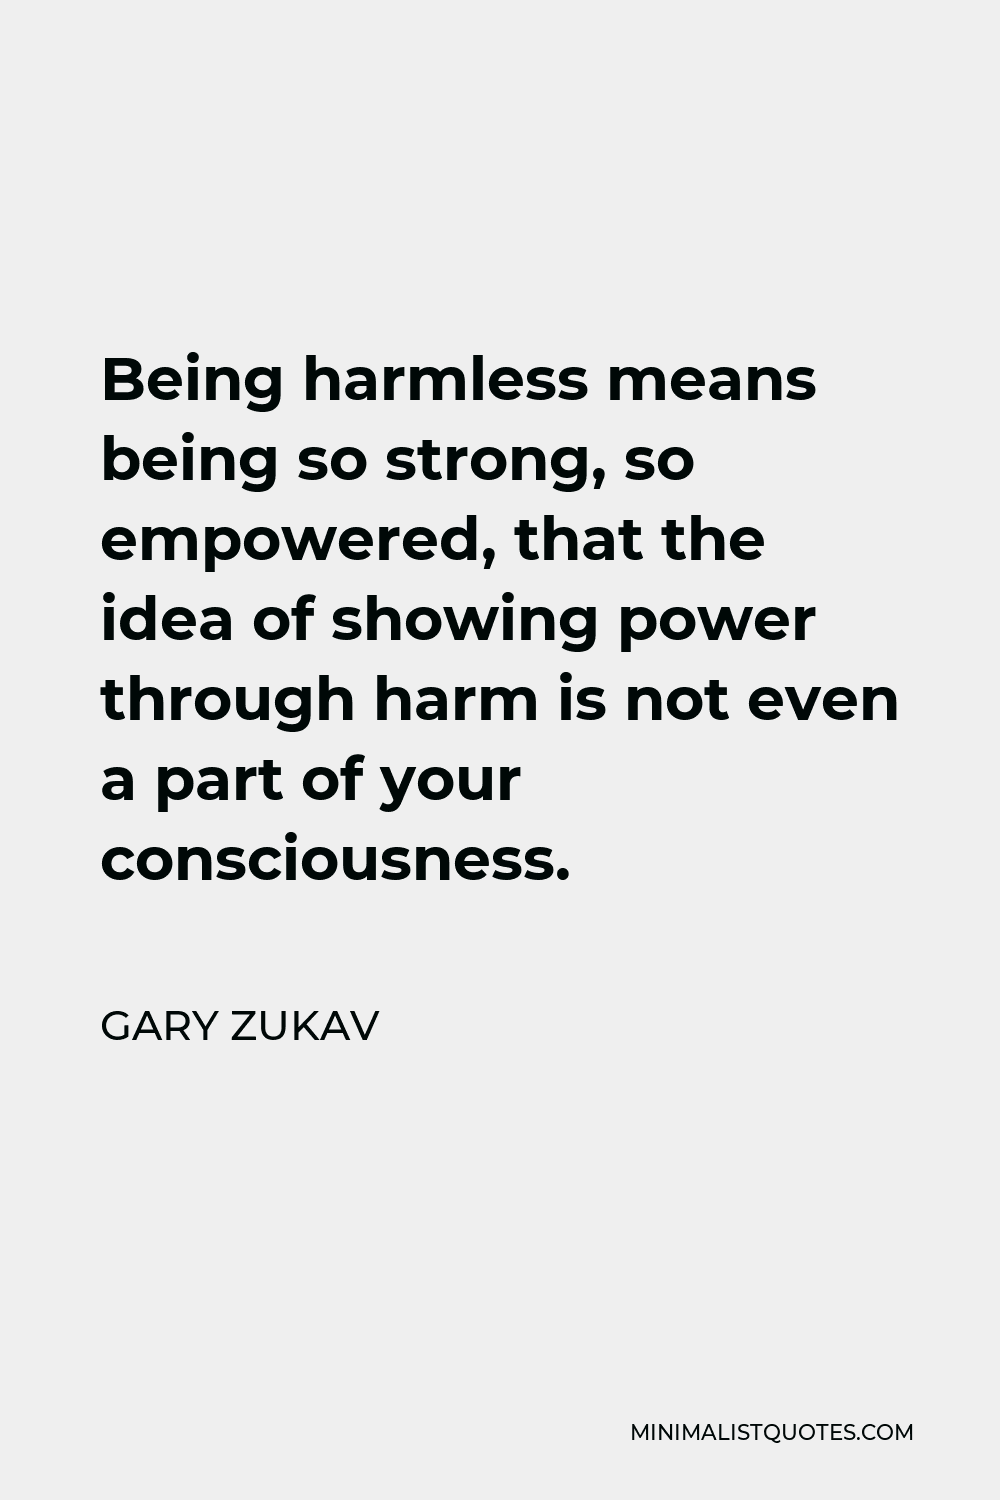 Gary Zukav Quote - Being harmless means being so strong, so empowered, that the idea of showing power through harm is not even a part of your consciousness.